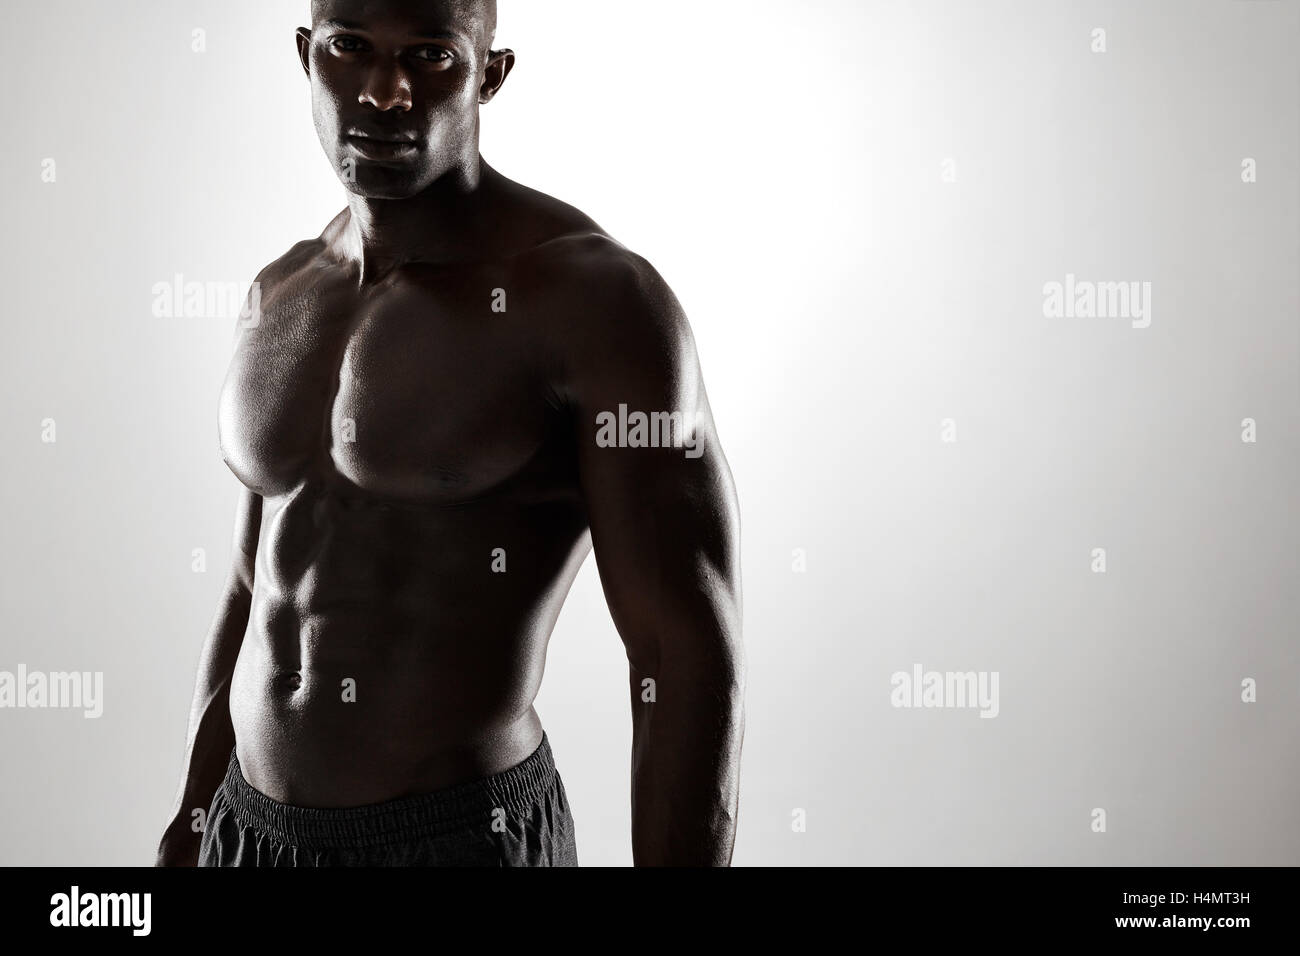 Portrait of young afro american man with muscular physique. Shirtless male model standing confidently against grey background. Stock Photo